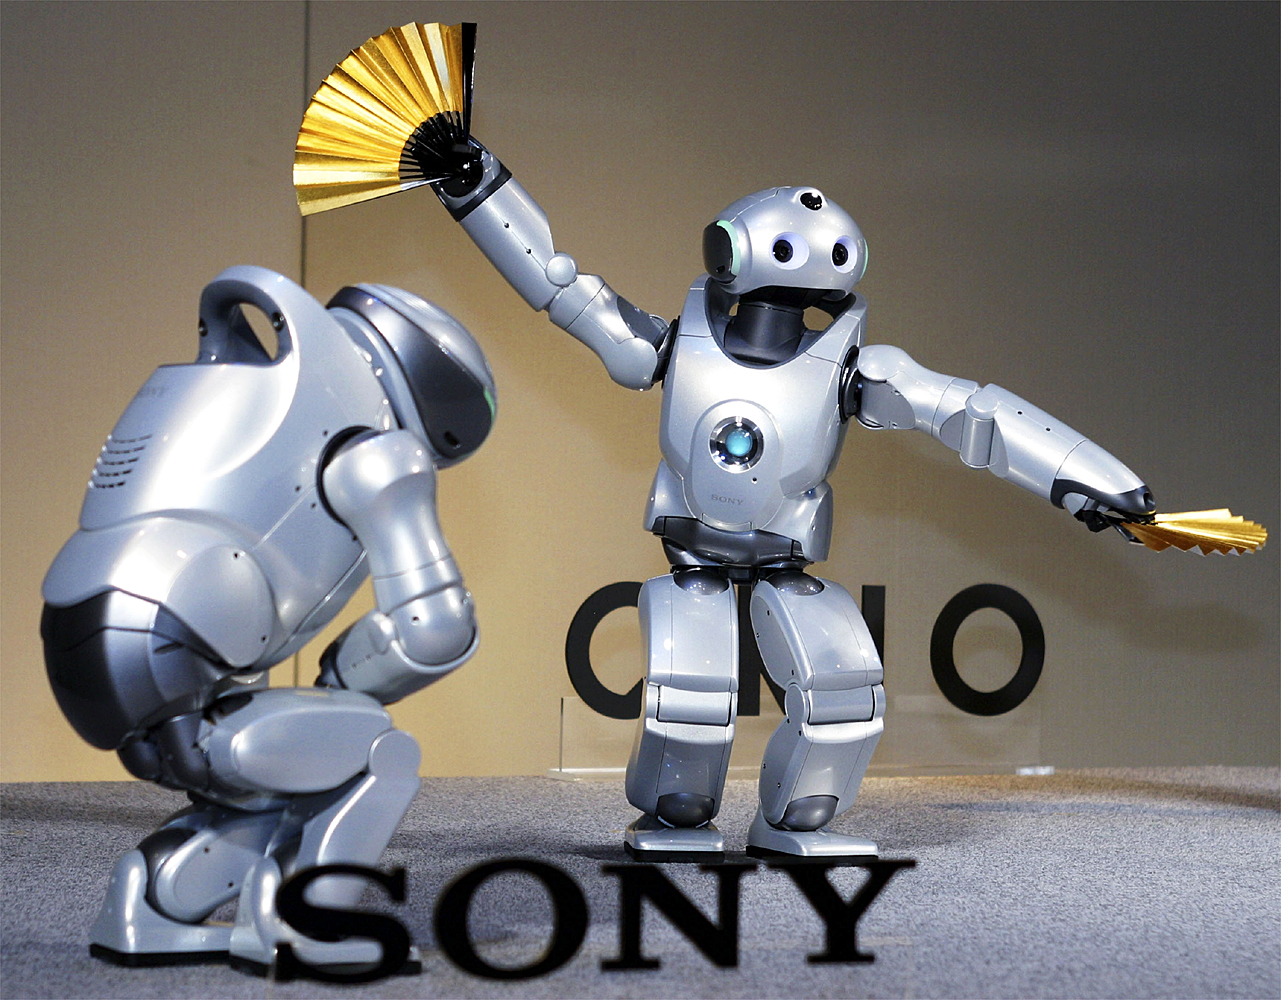 Sony's humanoid robot learns how to jog